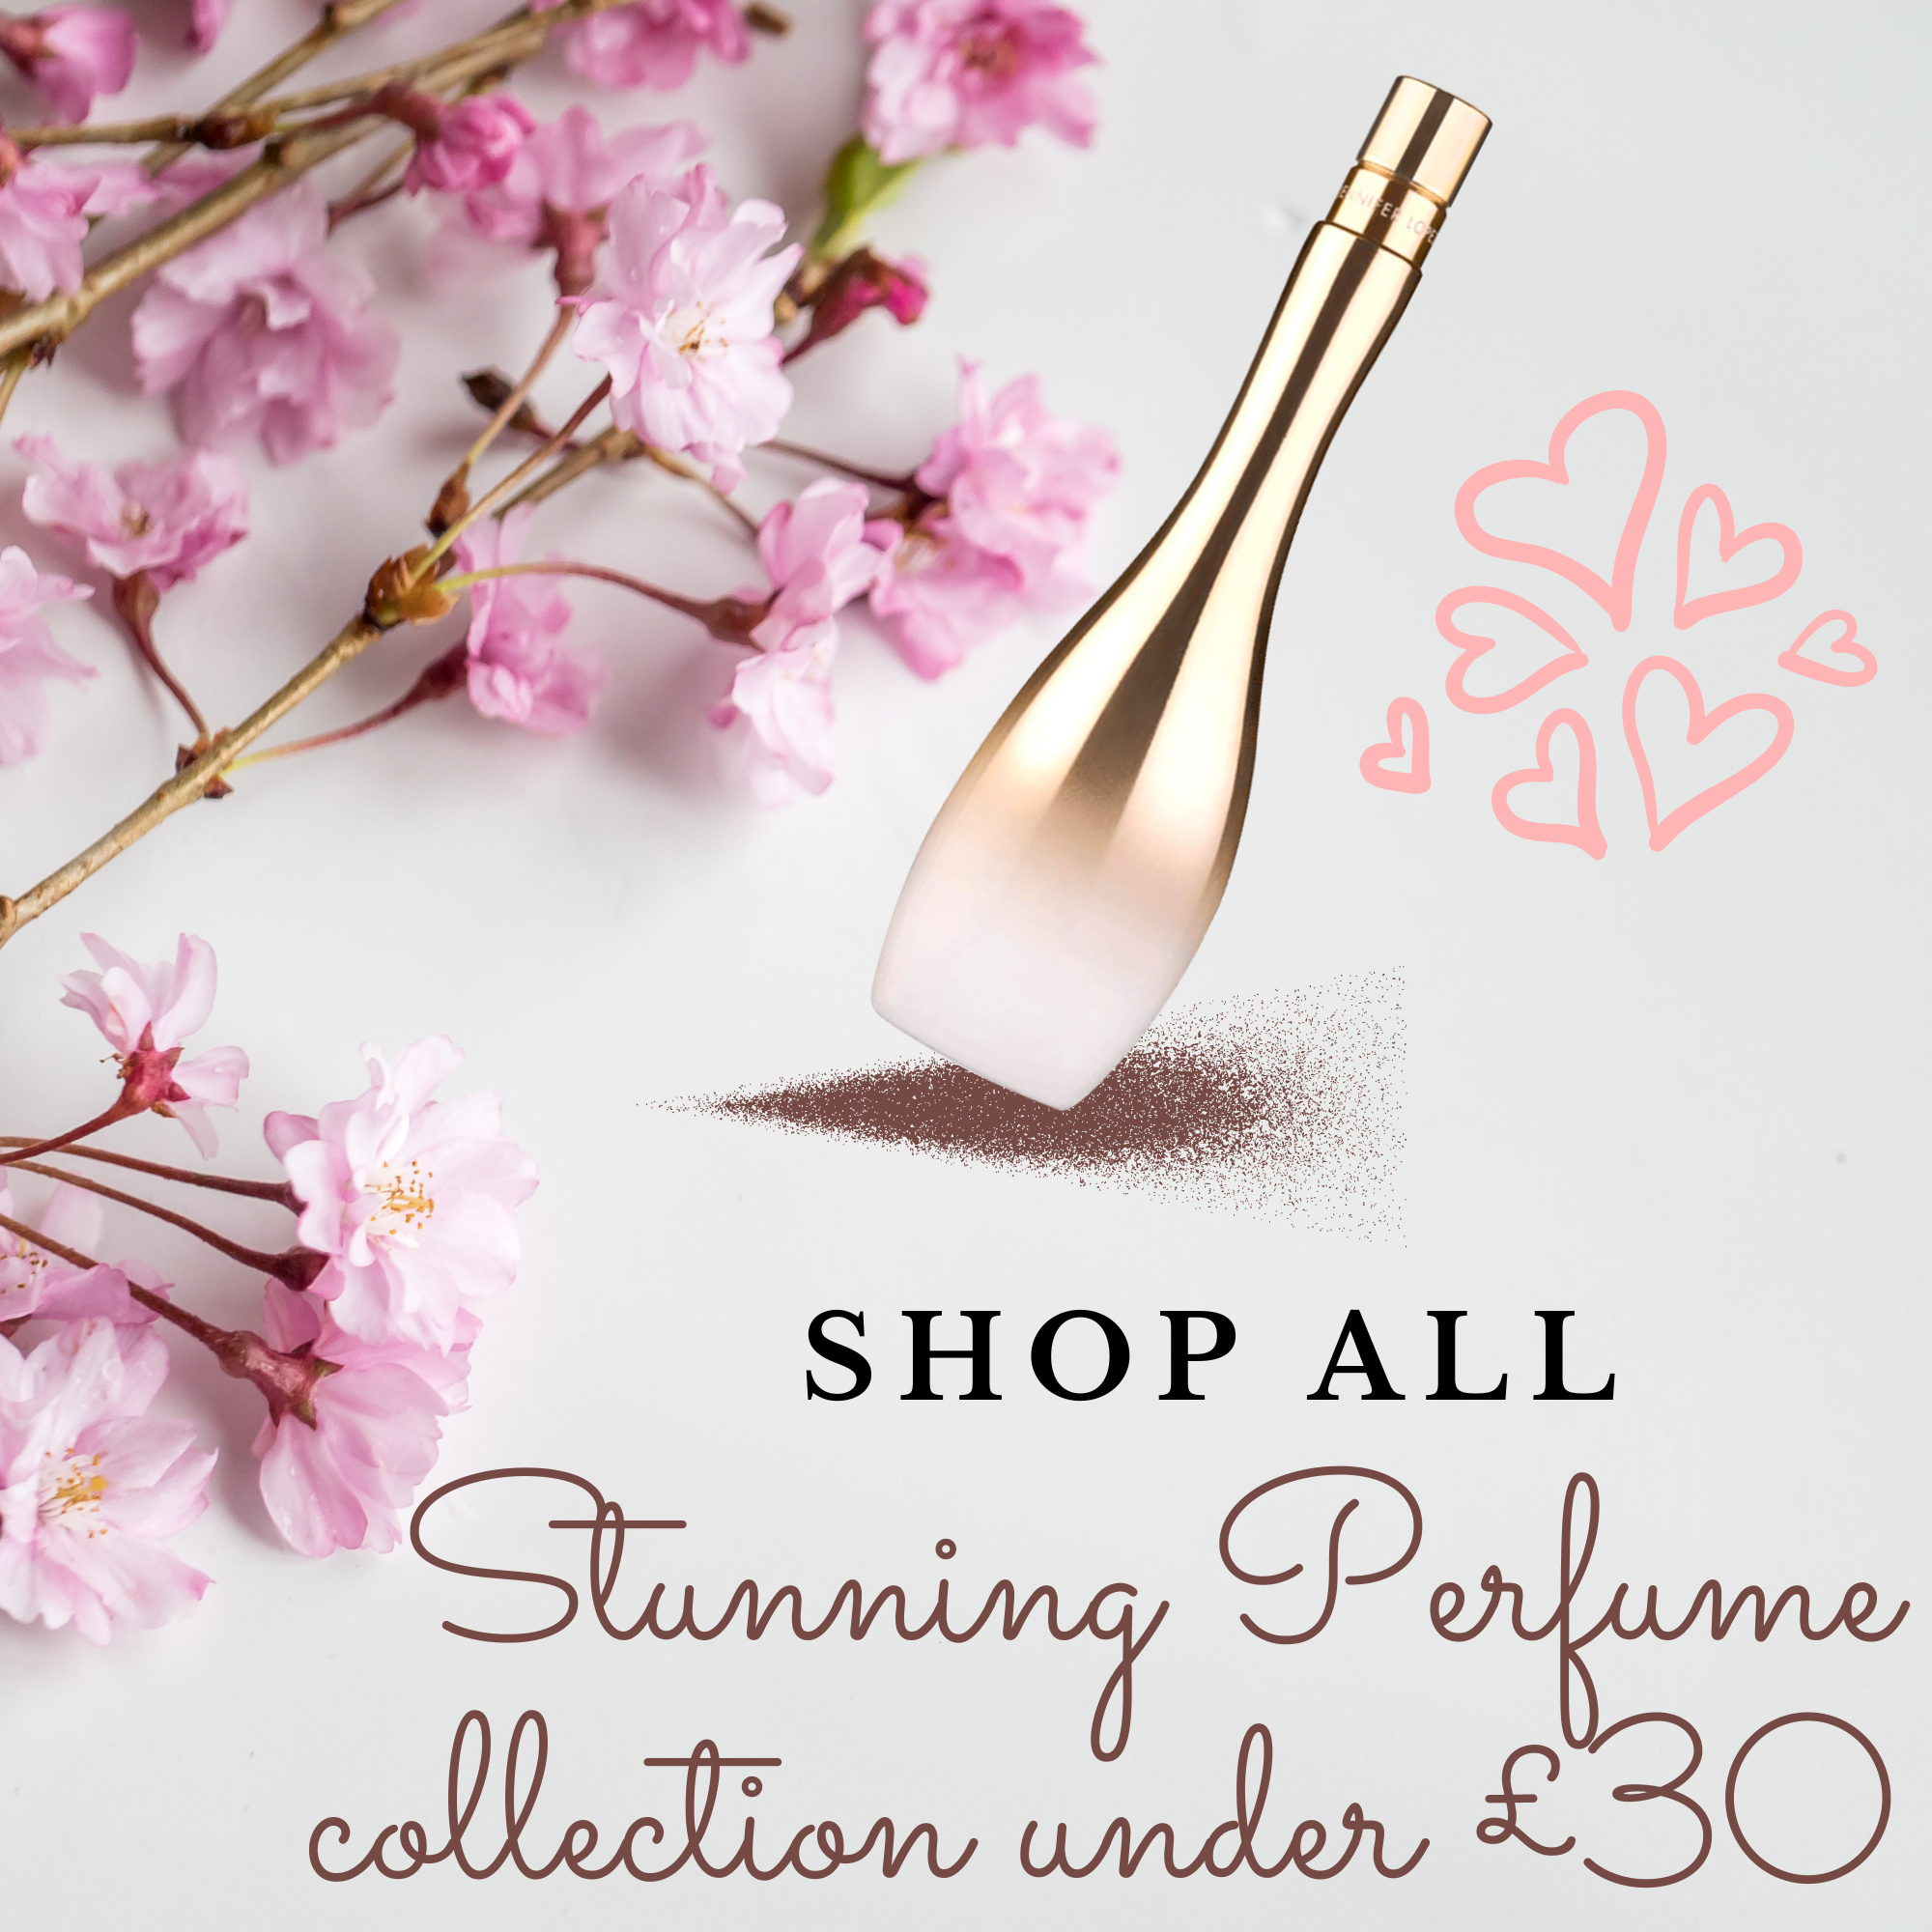 Complete range of Perfumes under £30 at THE PERFUME WORLD